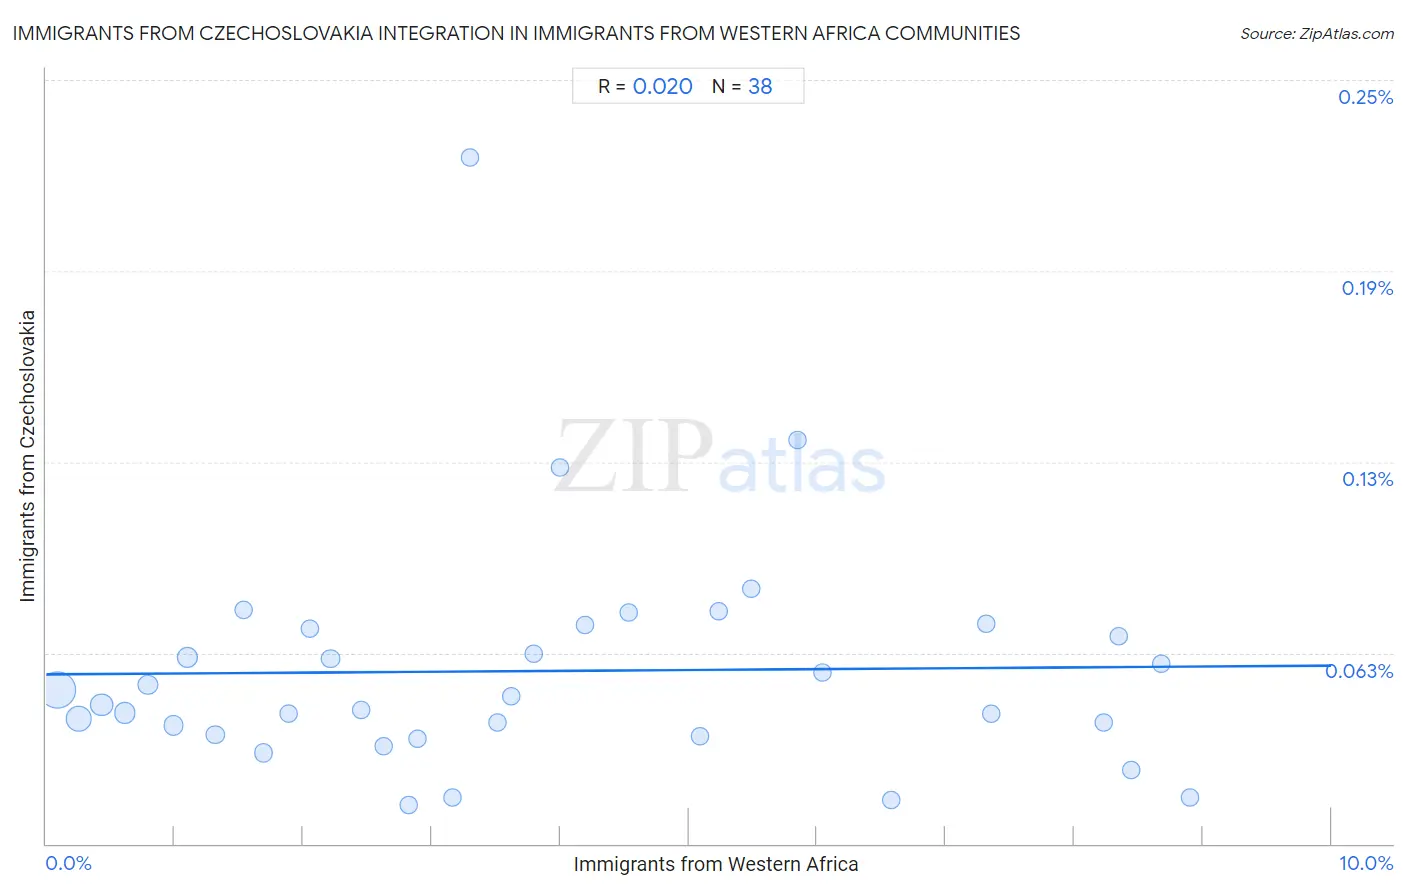 Immigrants from Western Africa Integration in Immigrants from Czechoslovakia Communities